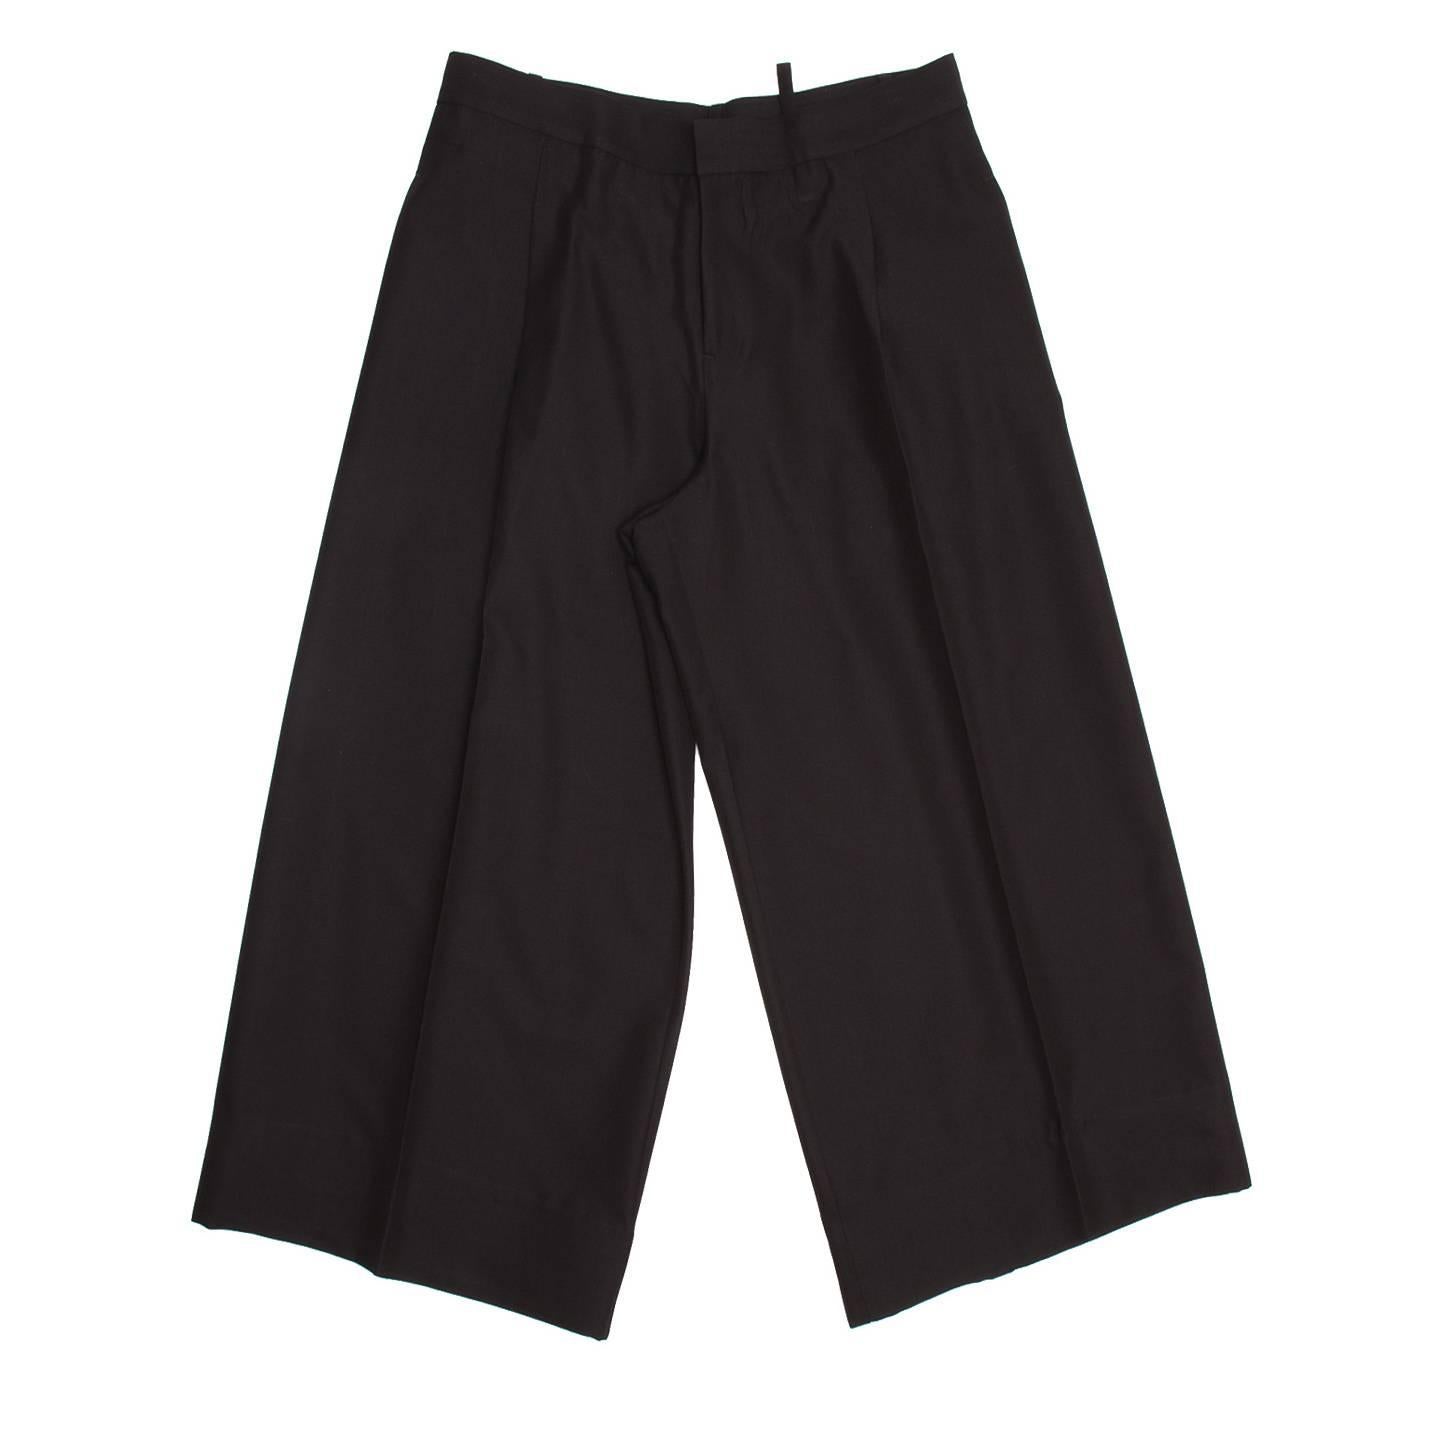 Yohji Yamamoto black wool and cotton tailor crafted baggy cropped pants with wide legs. There are slash pockets at front and elegant slit pockets at back.

Size  2

Condition  Excellent: worn a few times